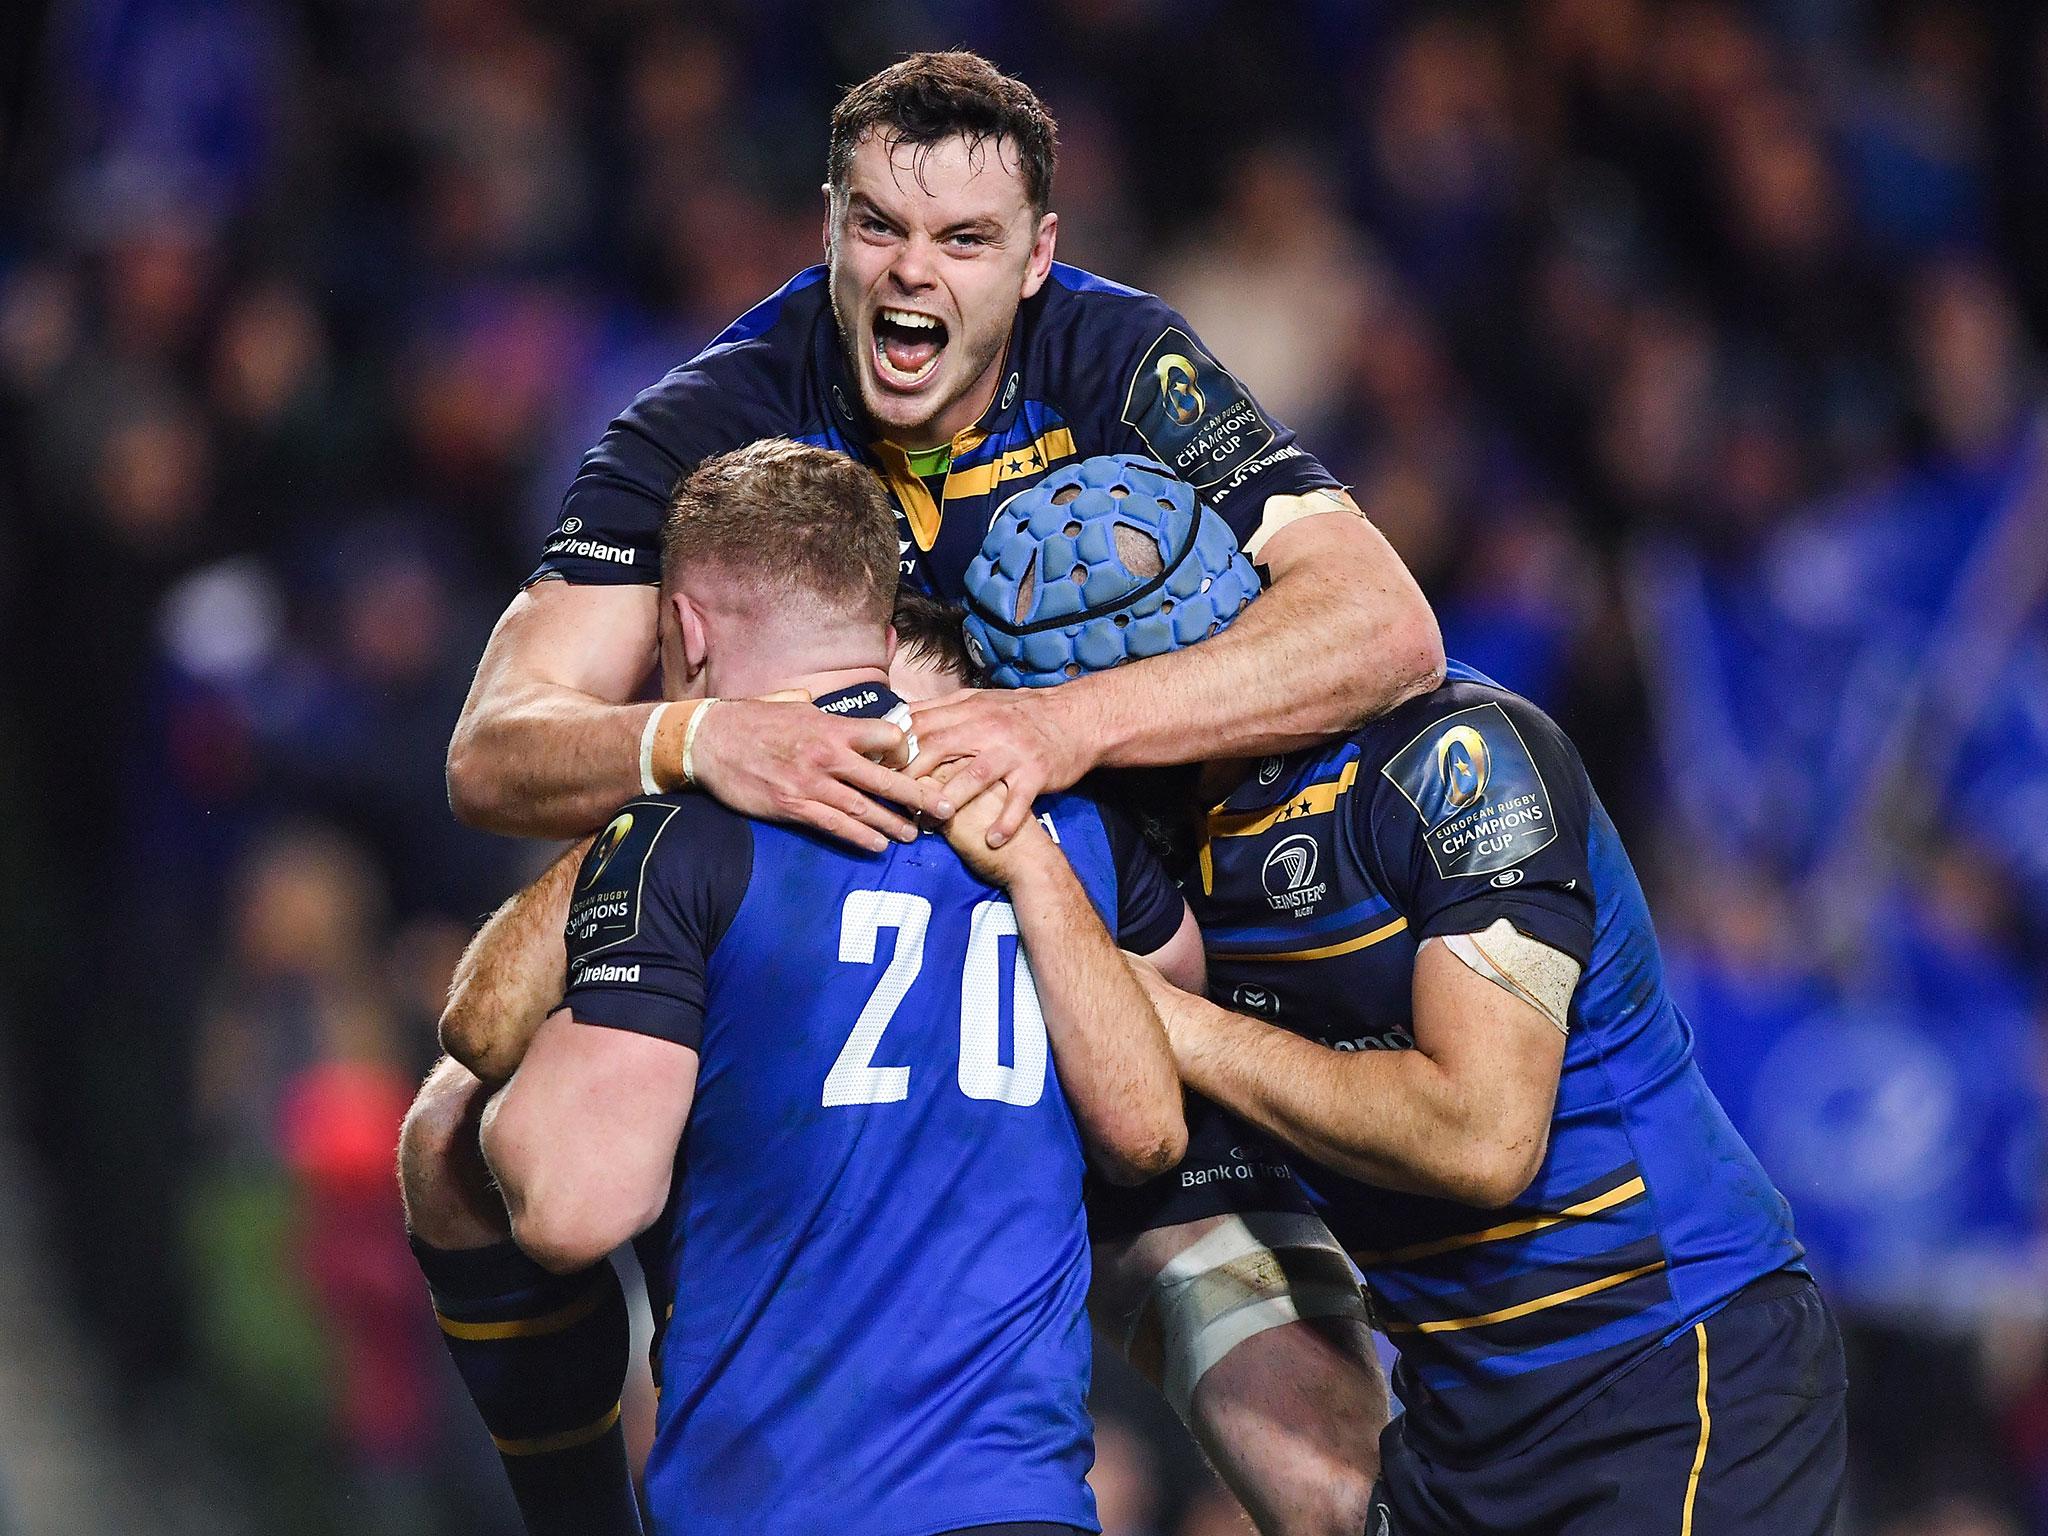 Leinster celebrate their victory after the final whistle